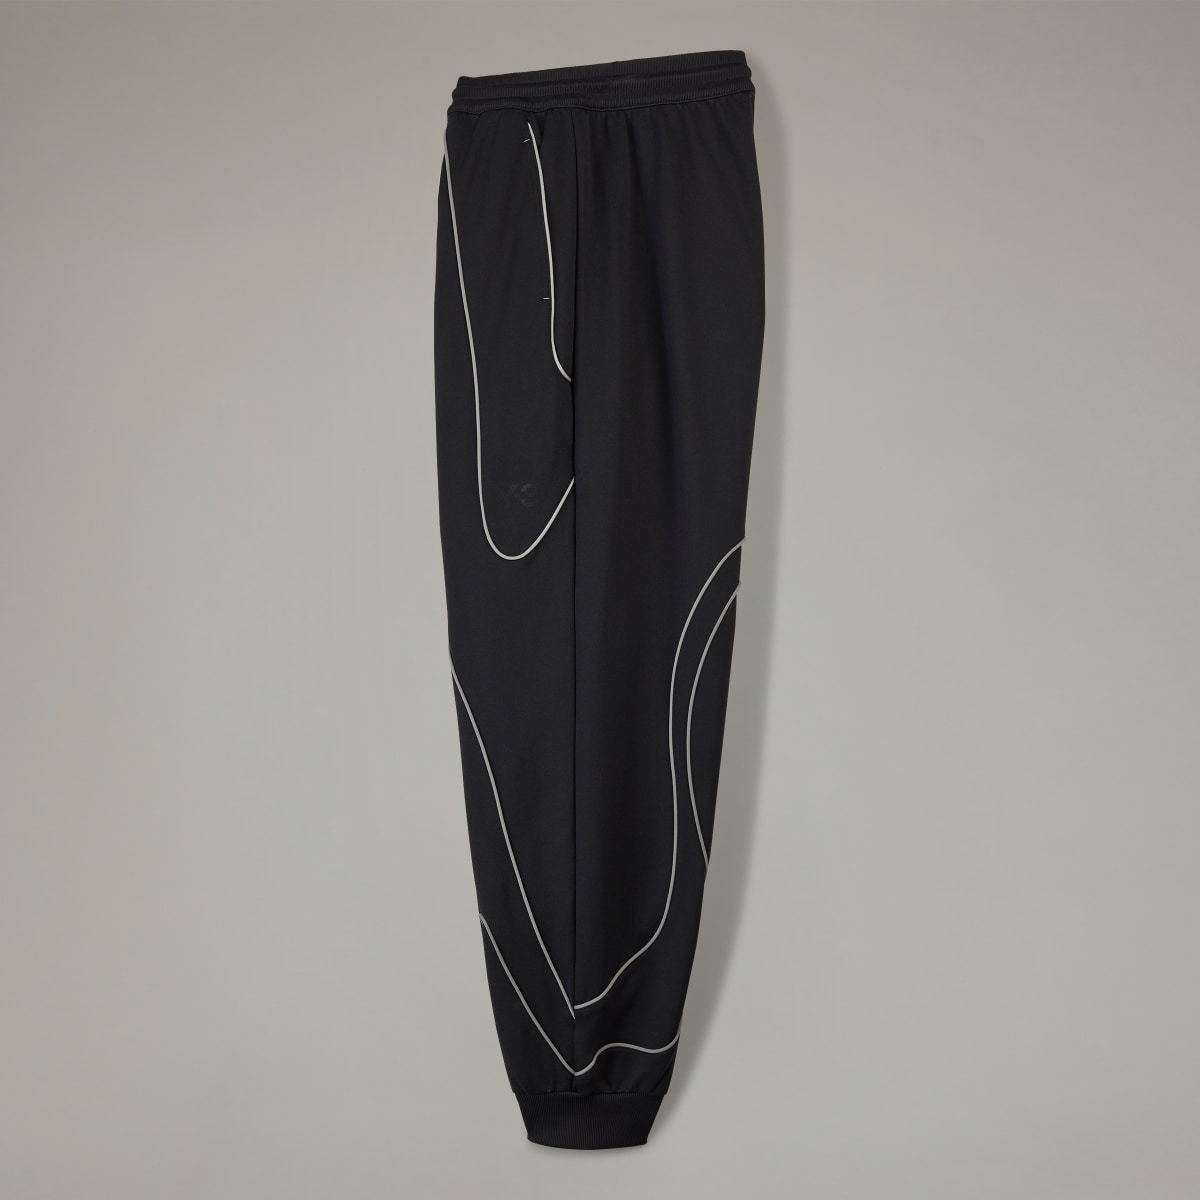 Adidas Y-3 Tracksuit Bottoms. 5